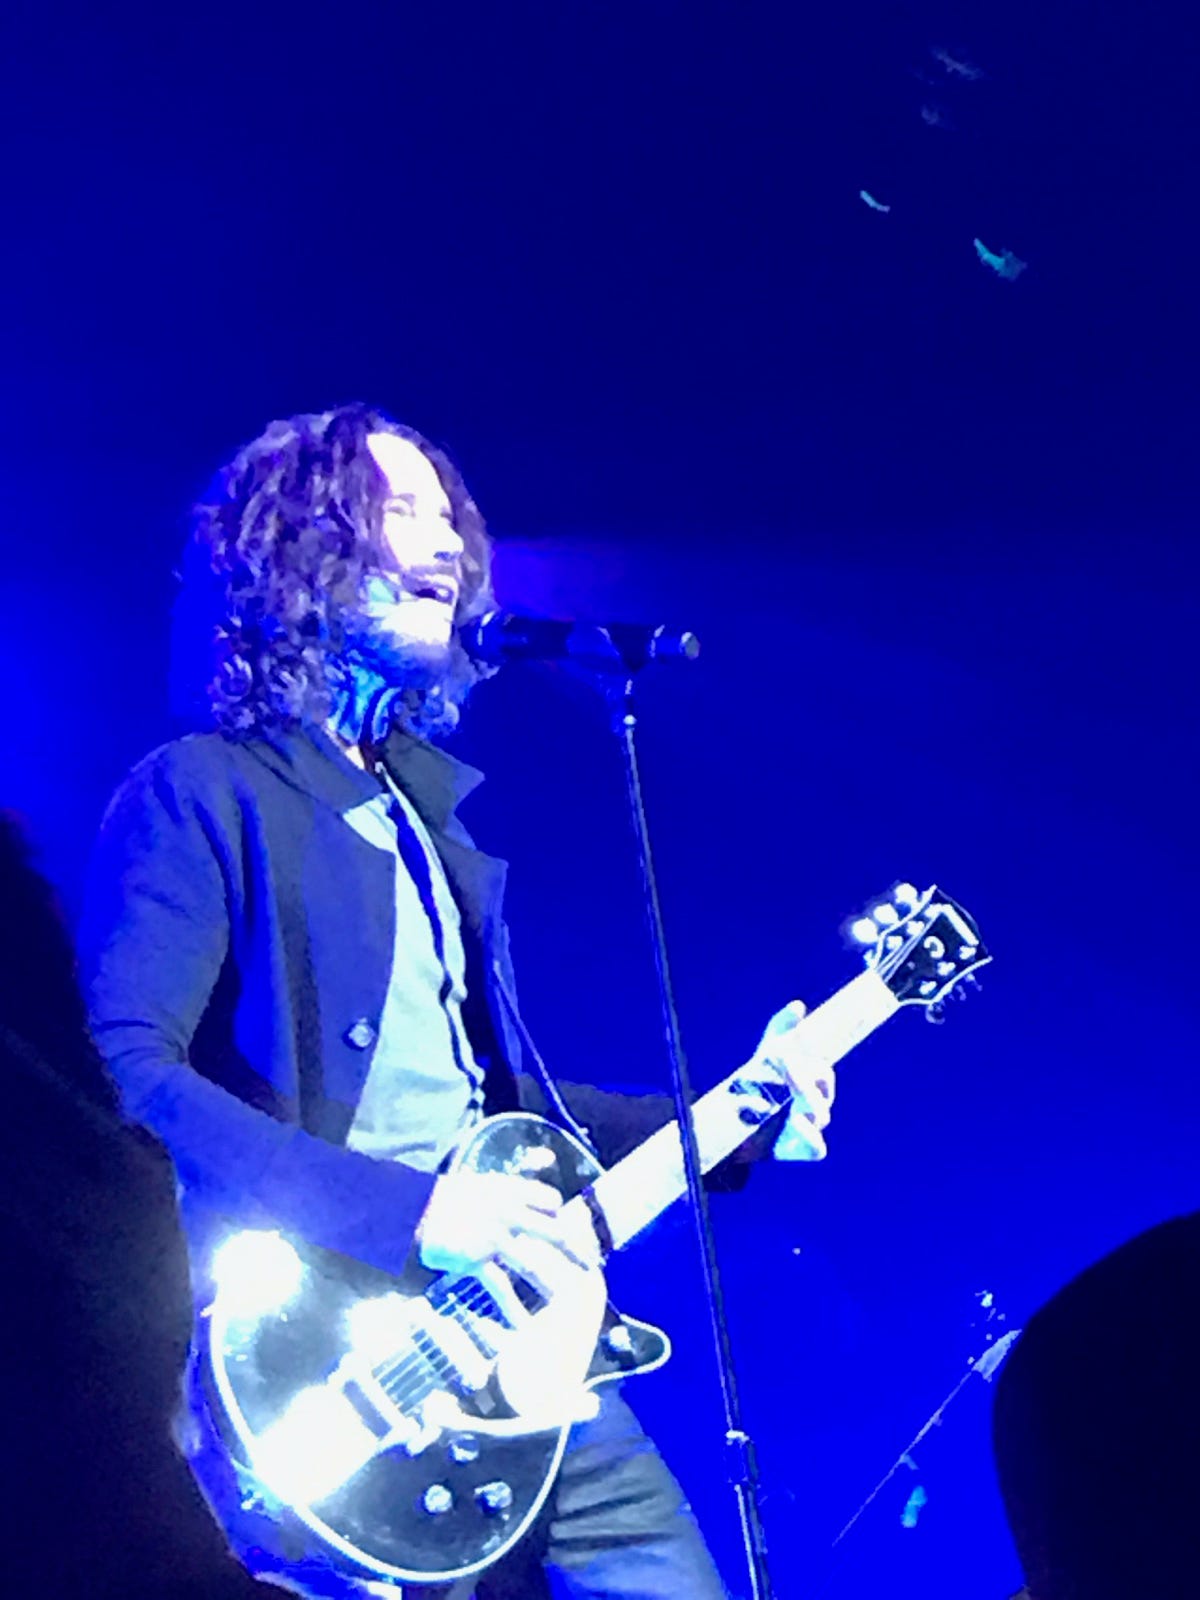 Chris Cornell gives his final concert Wednesday night, May 17, 2017,  at the Fox Theatre in Detroit.  He was found dead around midnight in a hotel room at the MGM Grand Detroit.